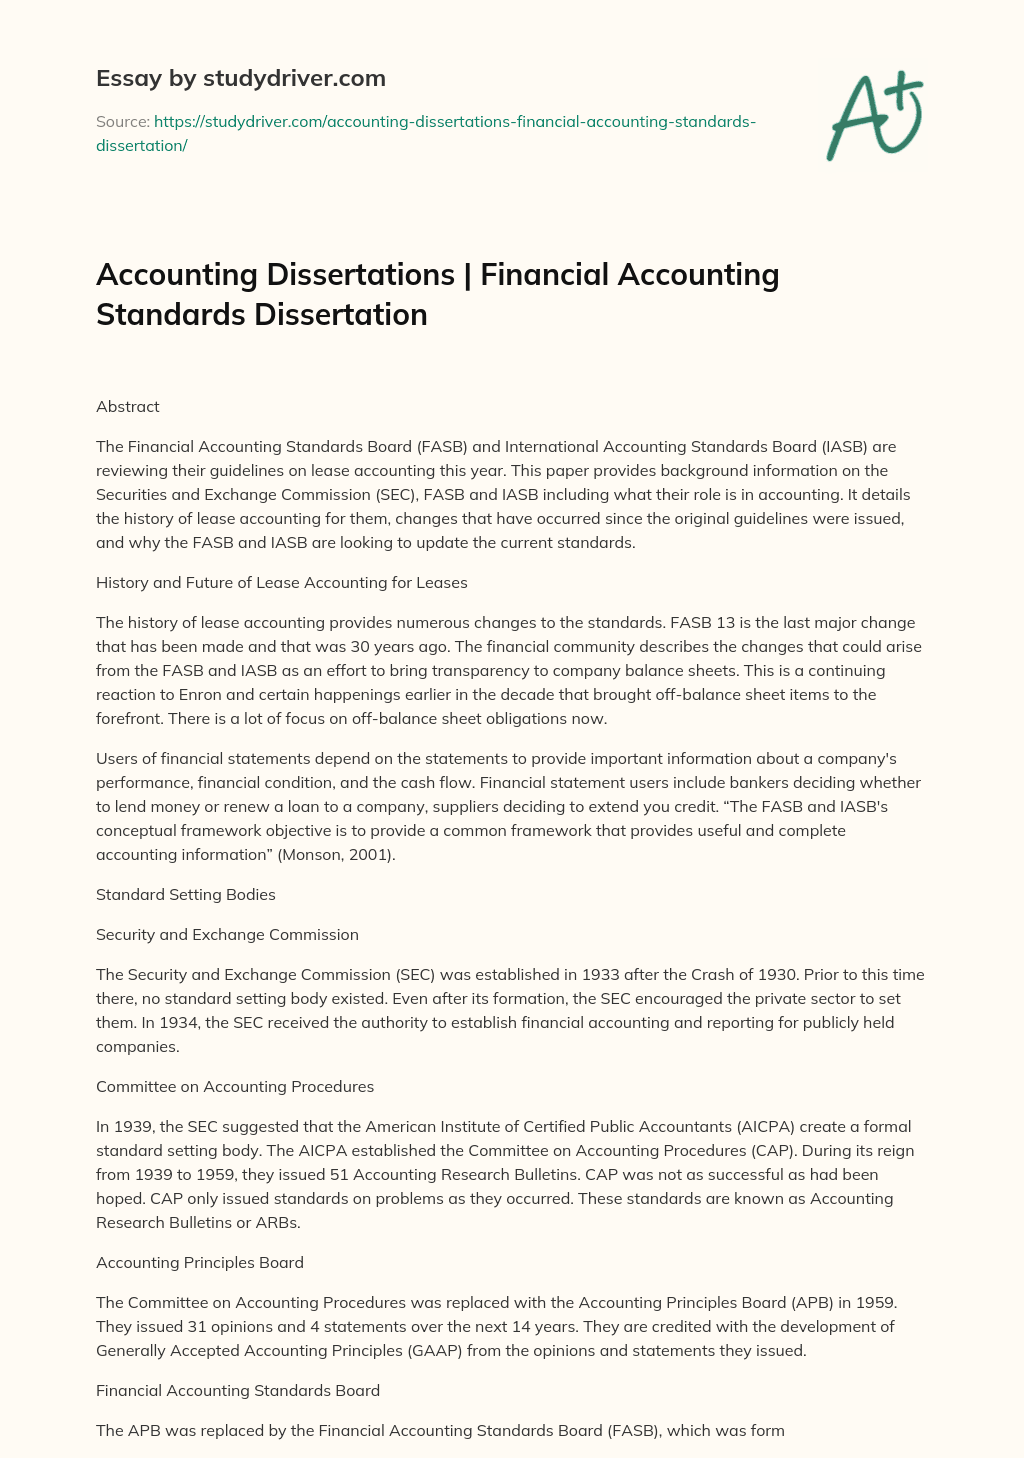 Accounting Dissertations | Financial Accounting Standards Dissertation essay